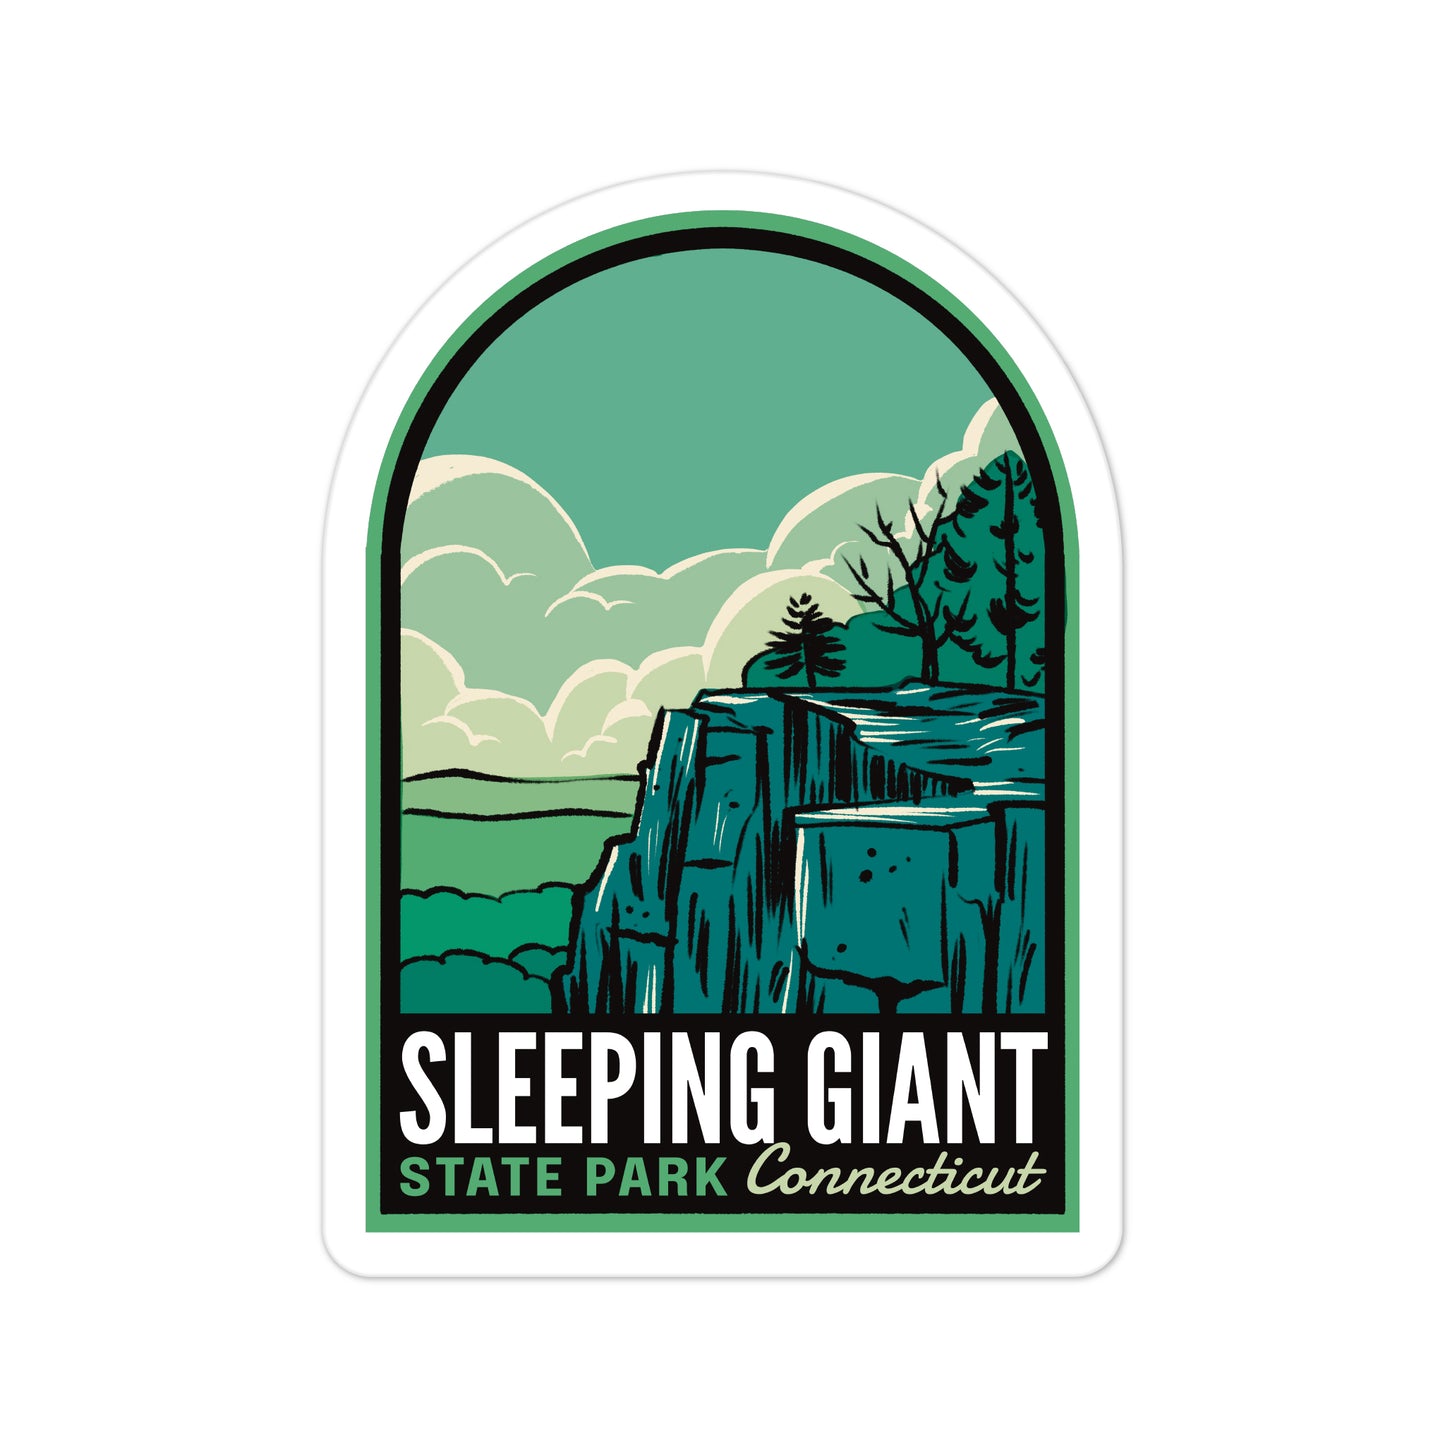 A sticker of Sleeping Giant State Park